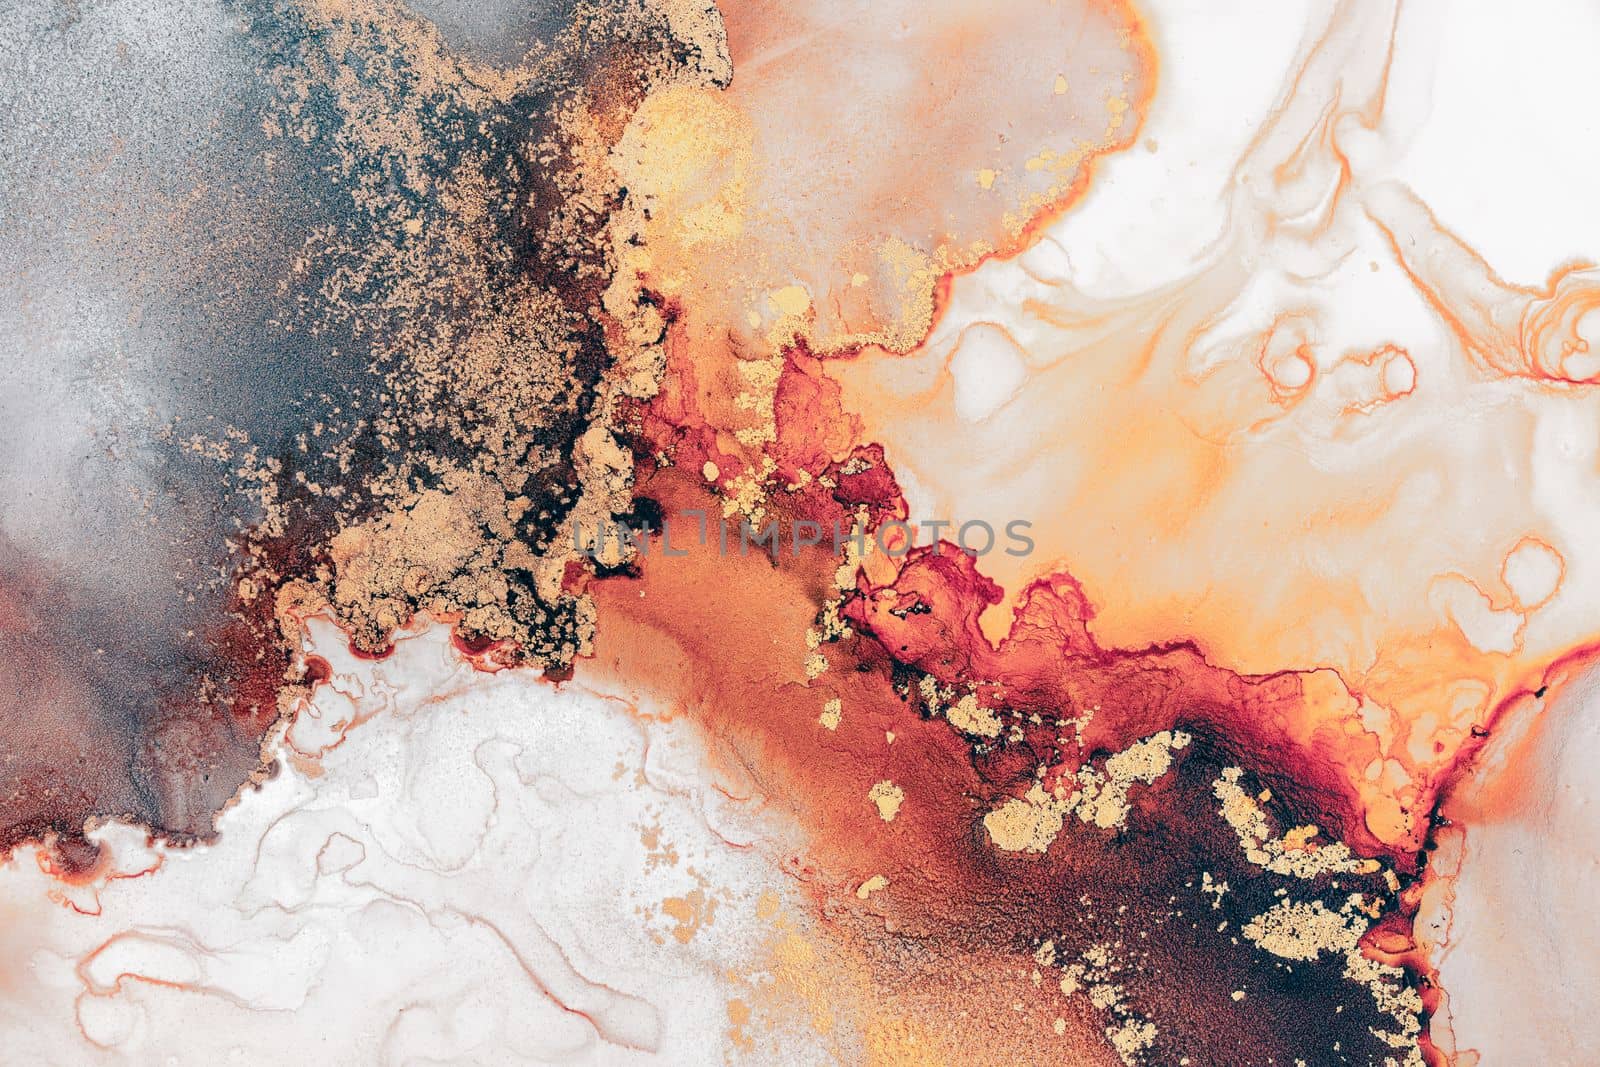 Burning abstract background from marble ink art of exquisite original painting . Painting was painted on high quality paper texture to create smooth marble background pattern of ombre alcohol ink .